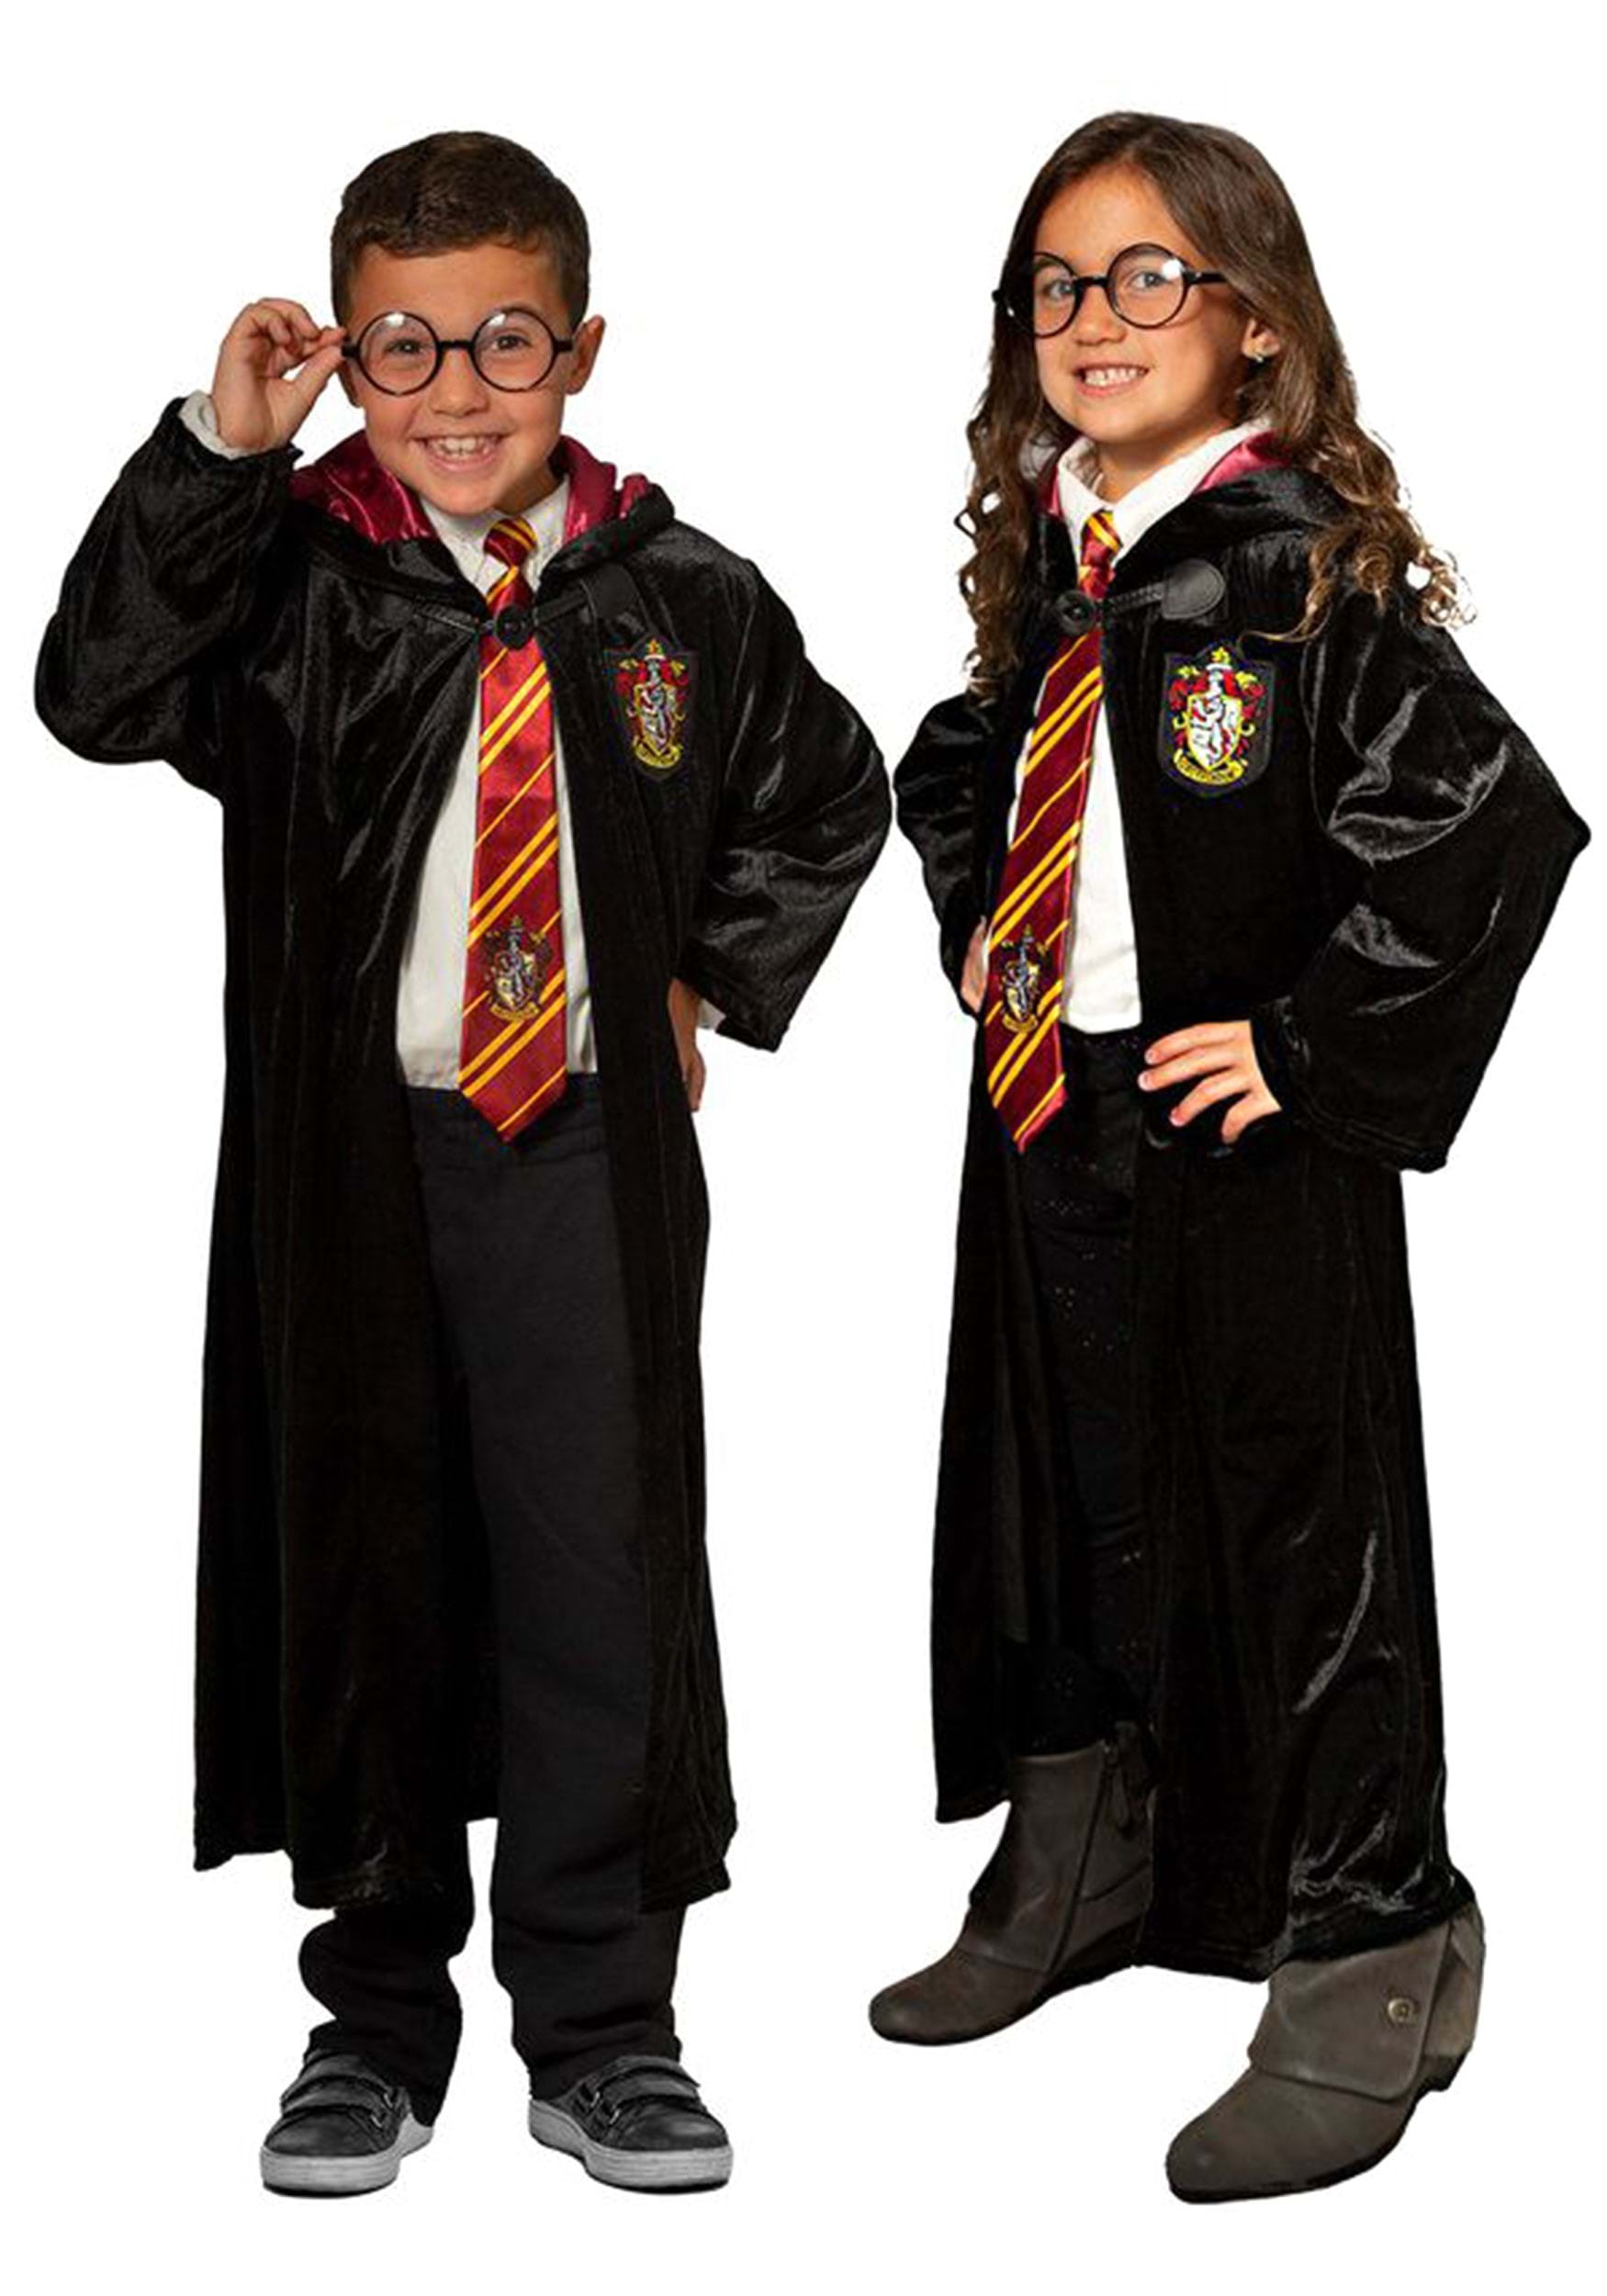 Child Deluxe Robe & Accessory Set from Harry Potter | Kid